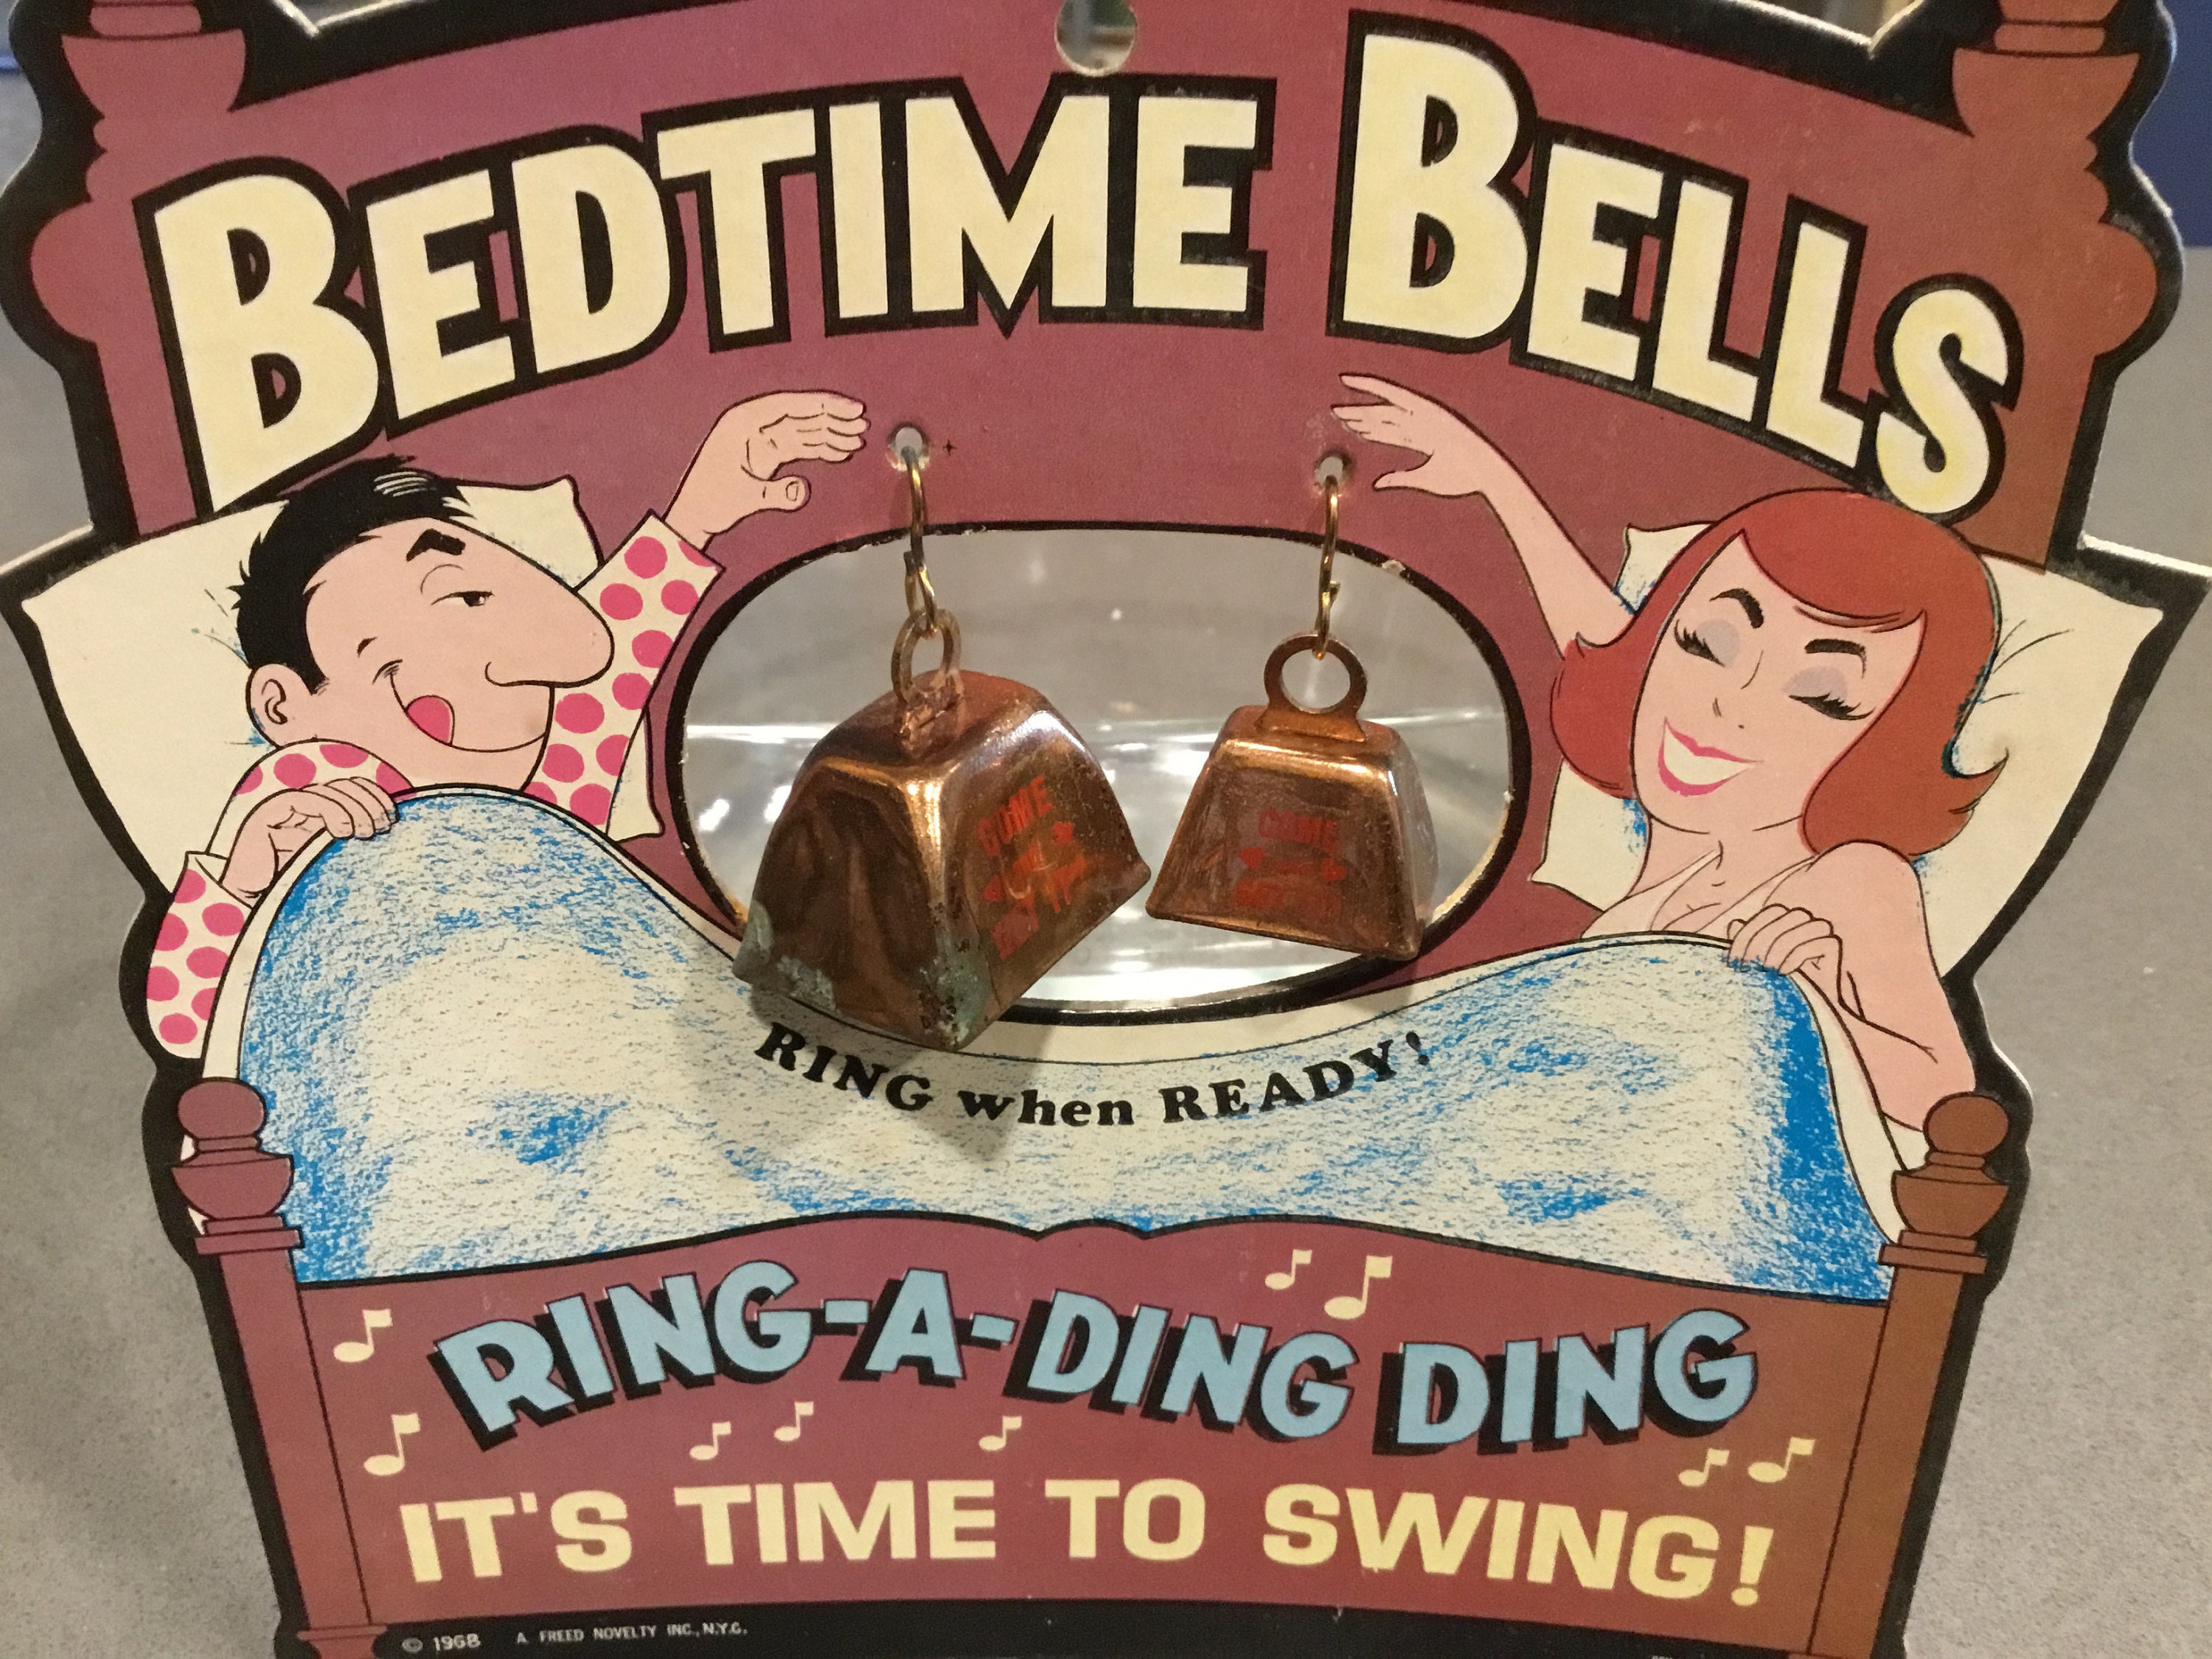 1968 Swingers Bed Time Bells by Freed Novelty Inc NYC ring a